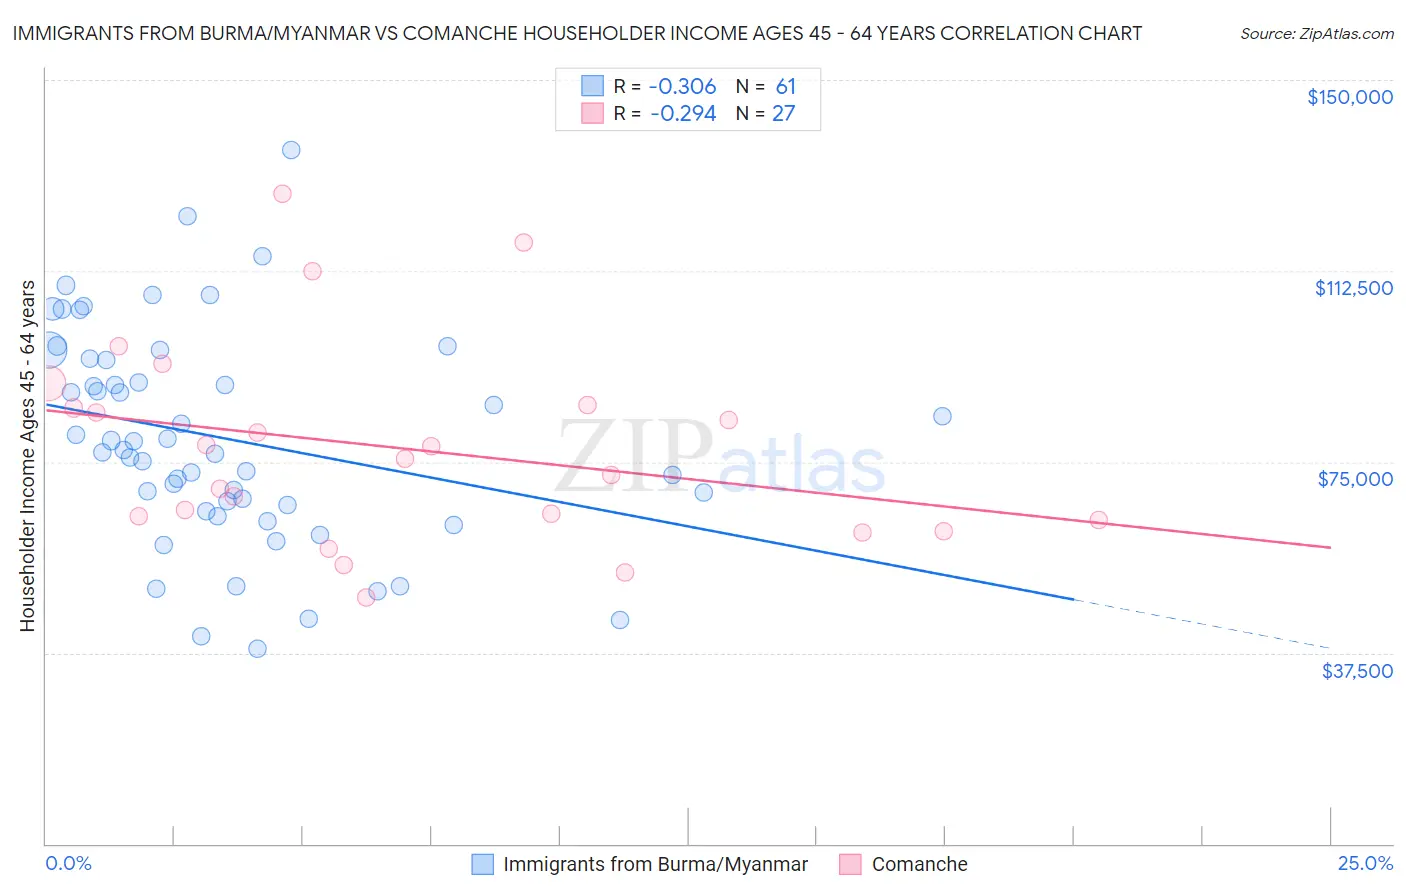 Immigrants from Burma/Myanmar vs Comanche Householder Income Ages 45 - 64 years